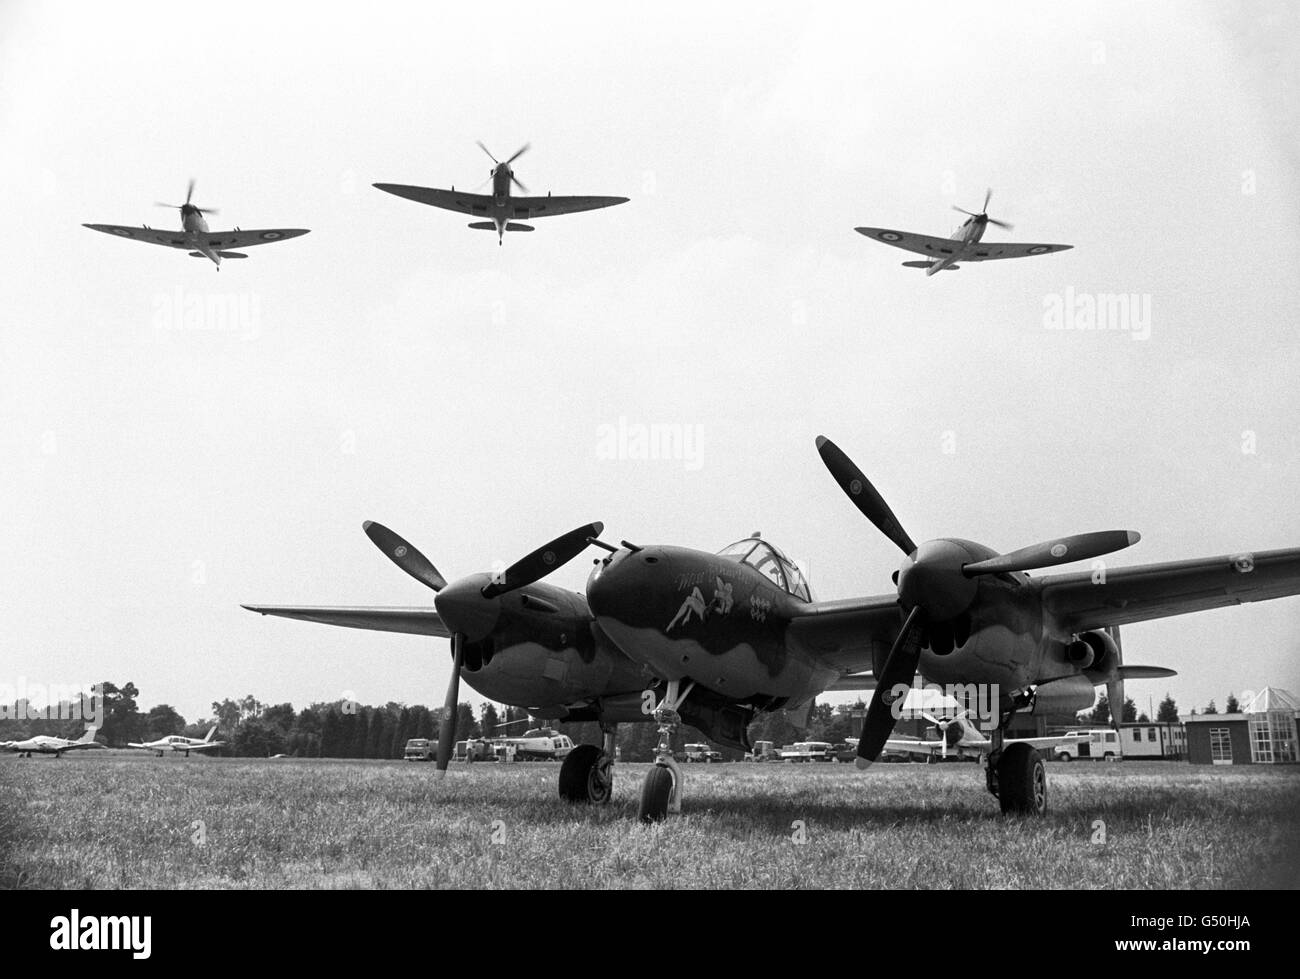 Three Spitfires fly over 'Miss Behaving', a Lockheed P38 Lightning. These vintage aircraft of World War Two are on display at the Biggin Hill International Air Fair Stock Photo